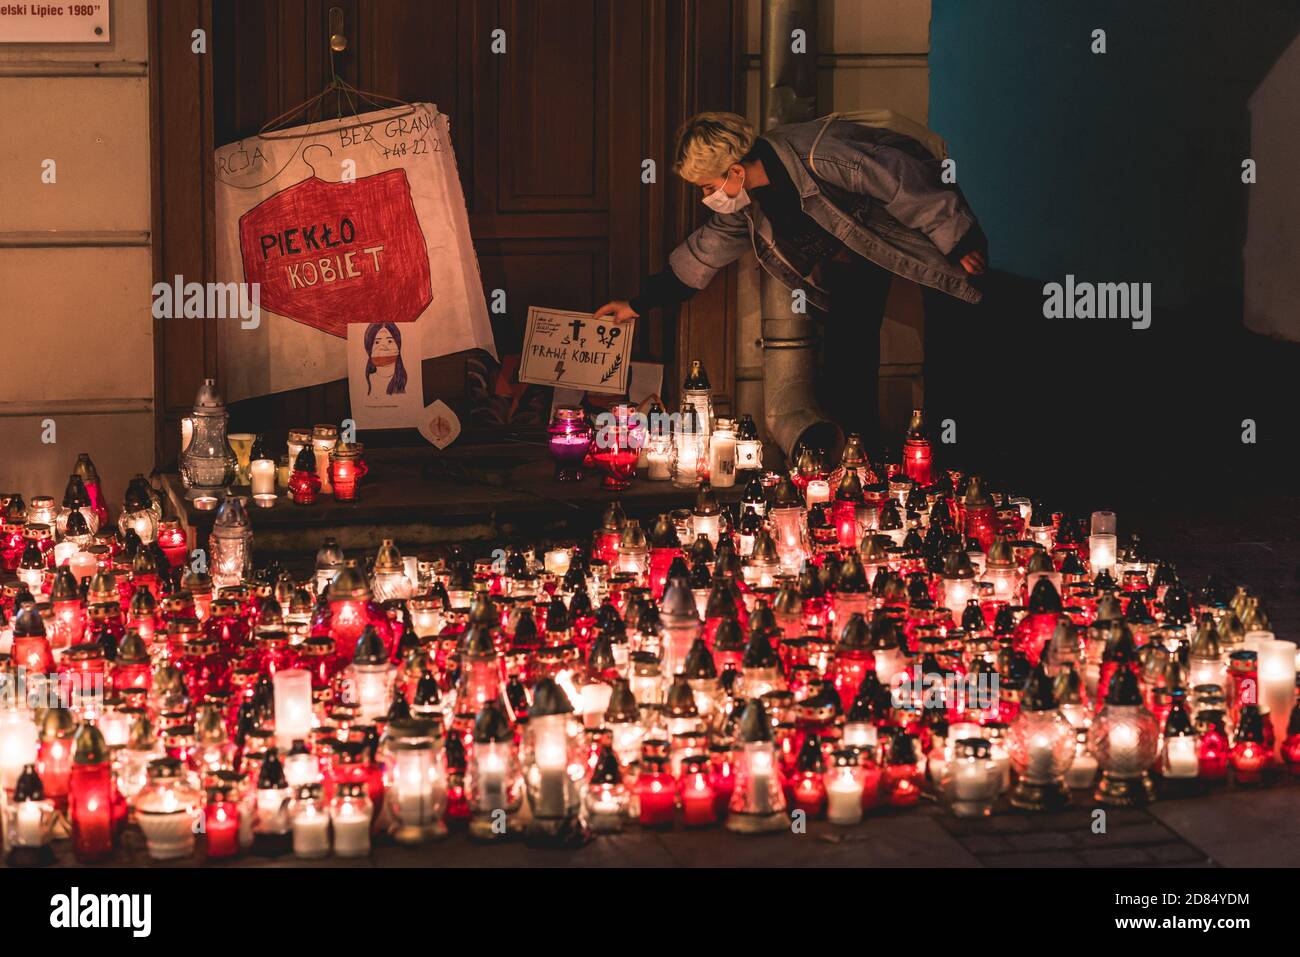 Lublin, Poland - October 23, 2020: Woman putting down the banner during protest by Strajk Kobiet against abortion ban in Poland Stock Photo